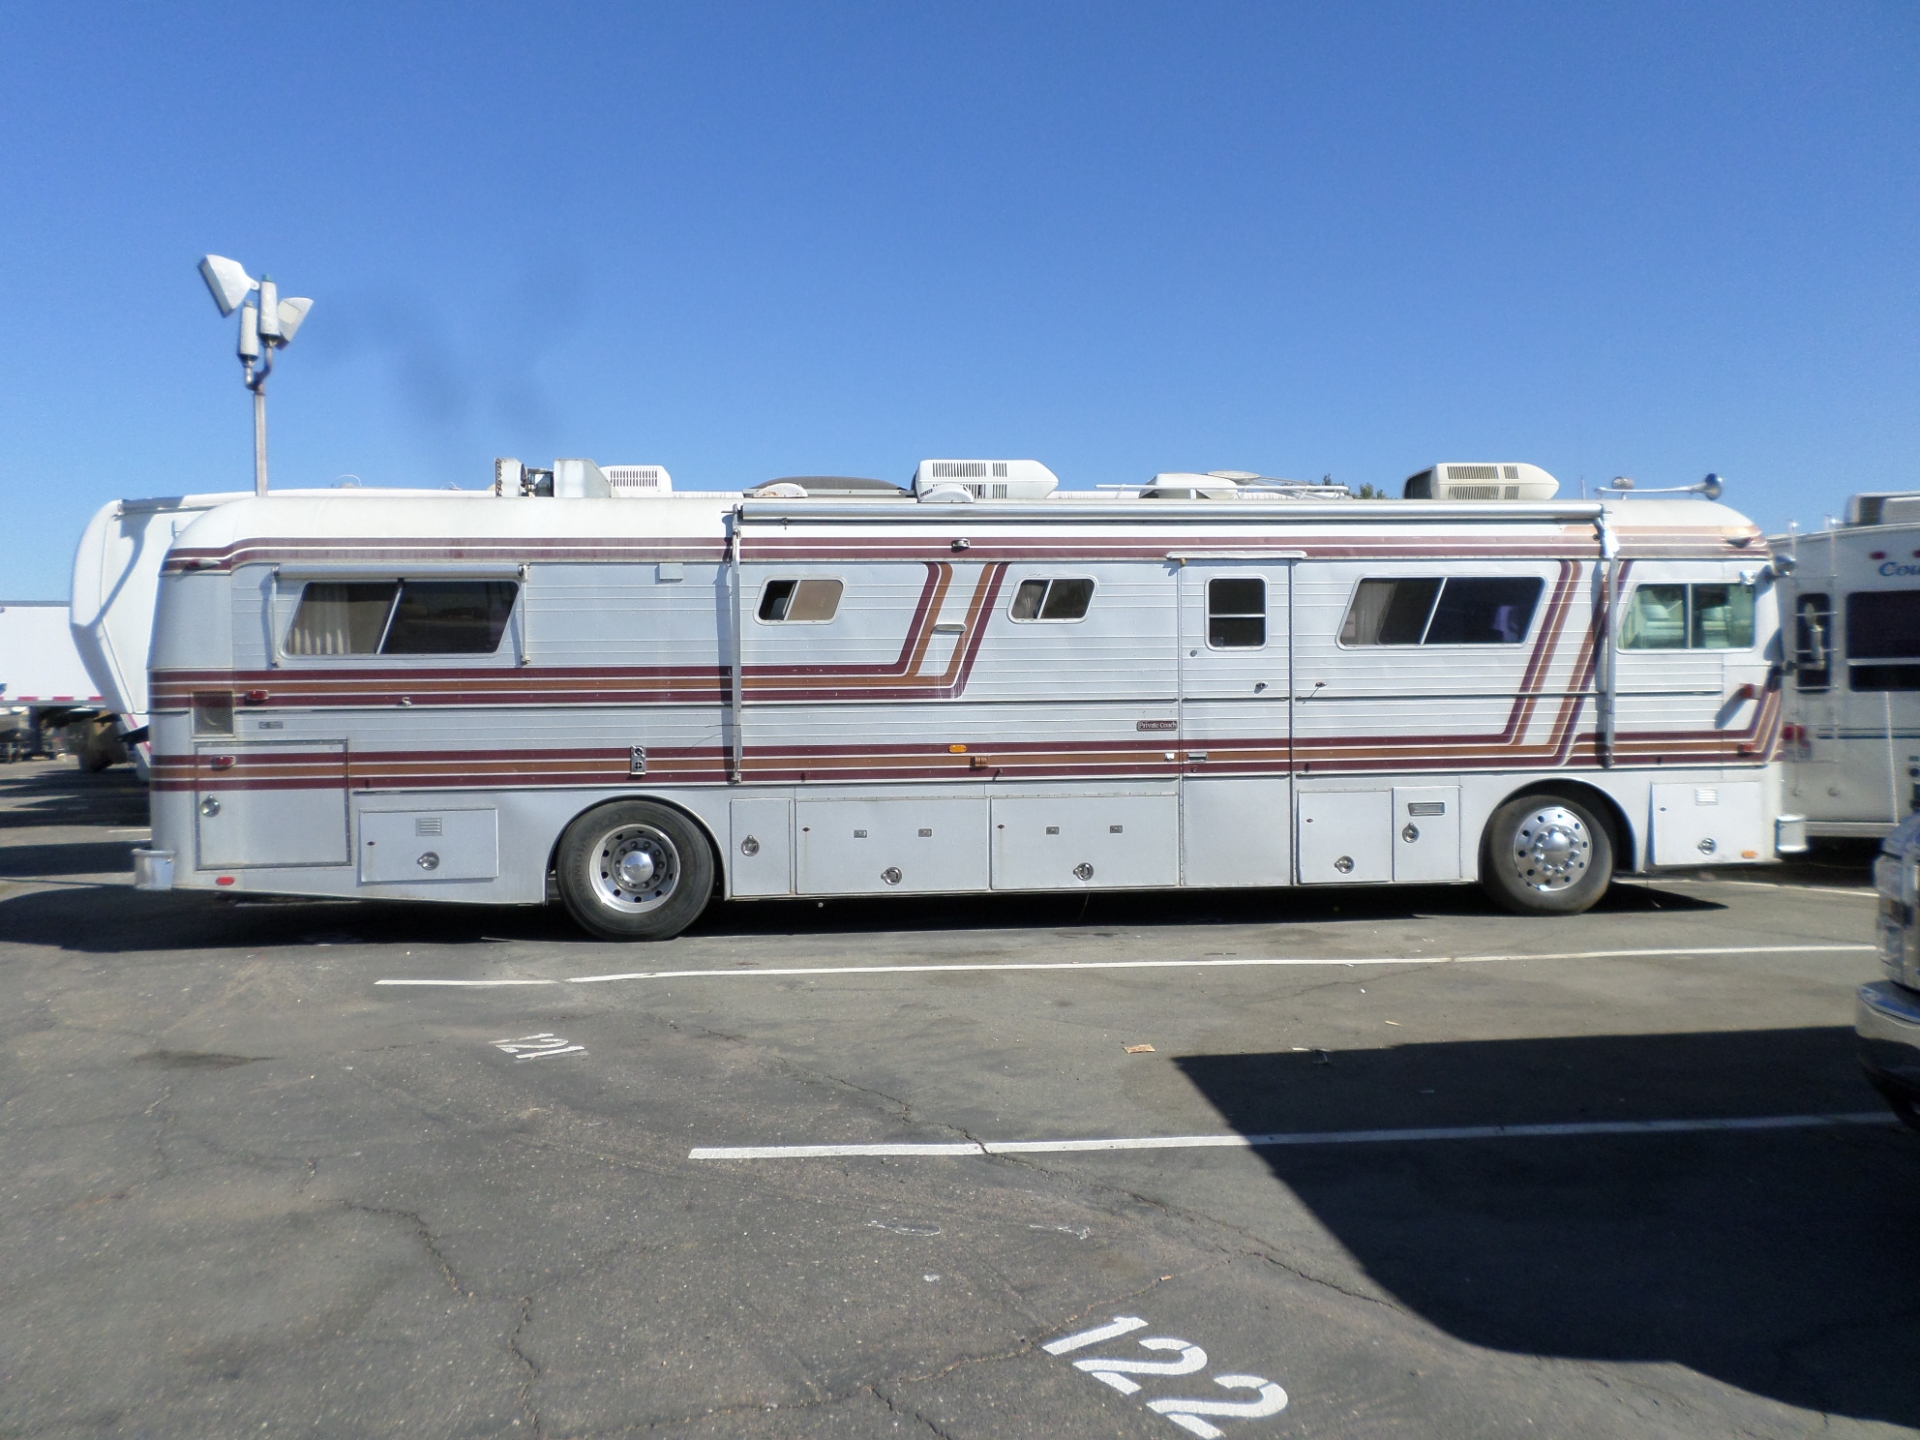 RV for sale: 1980 Newell Coach Classic Diesel Bus 40' in Lodi Stockton CA -  Lodi Park and Sell